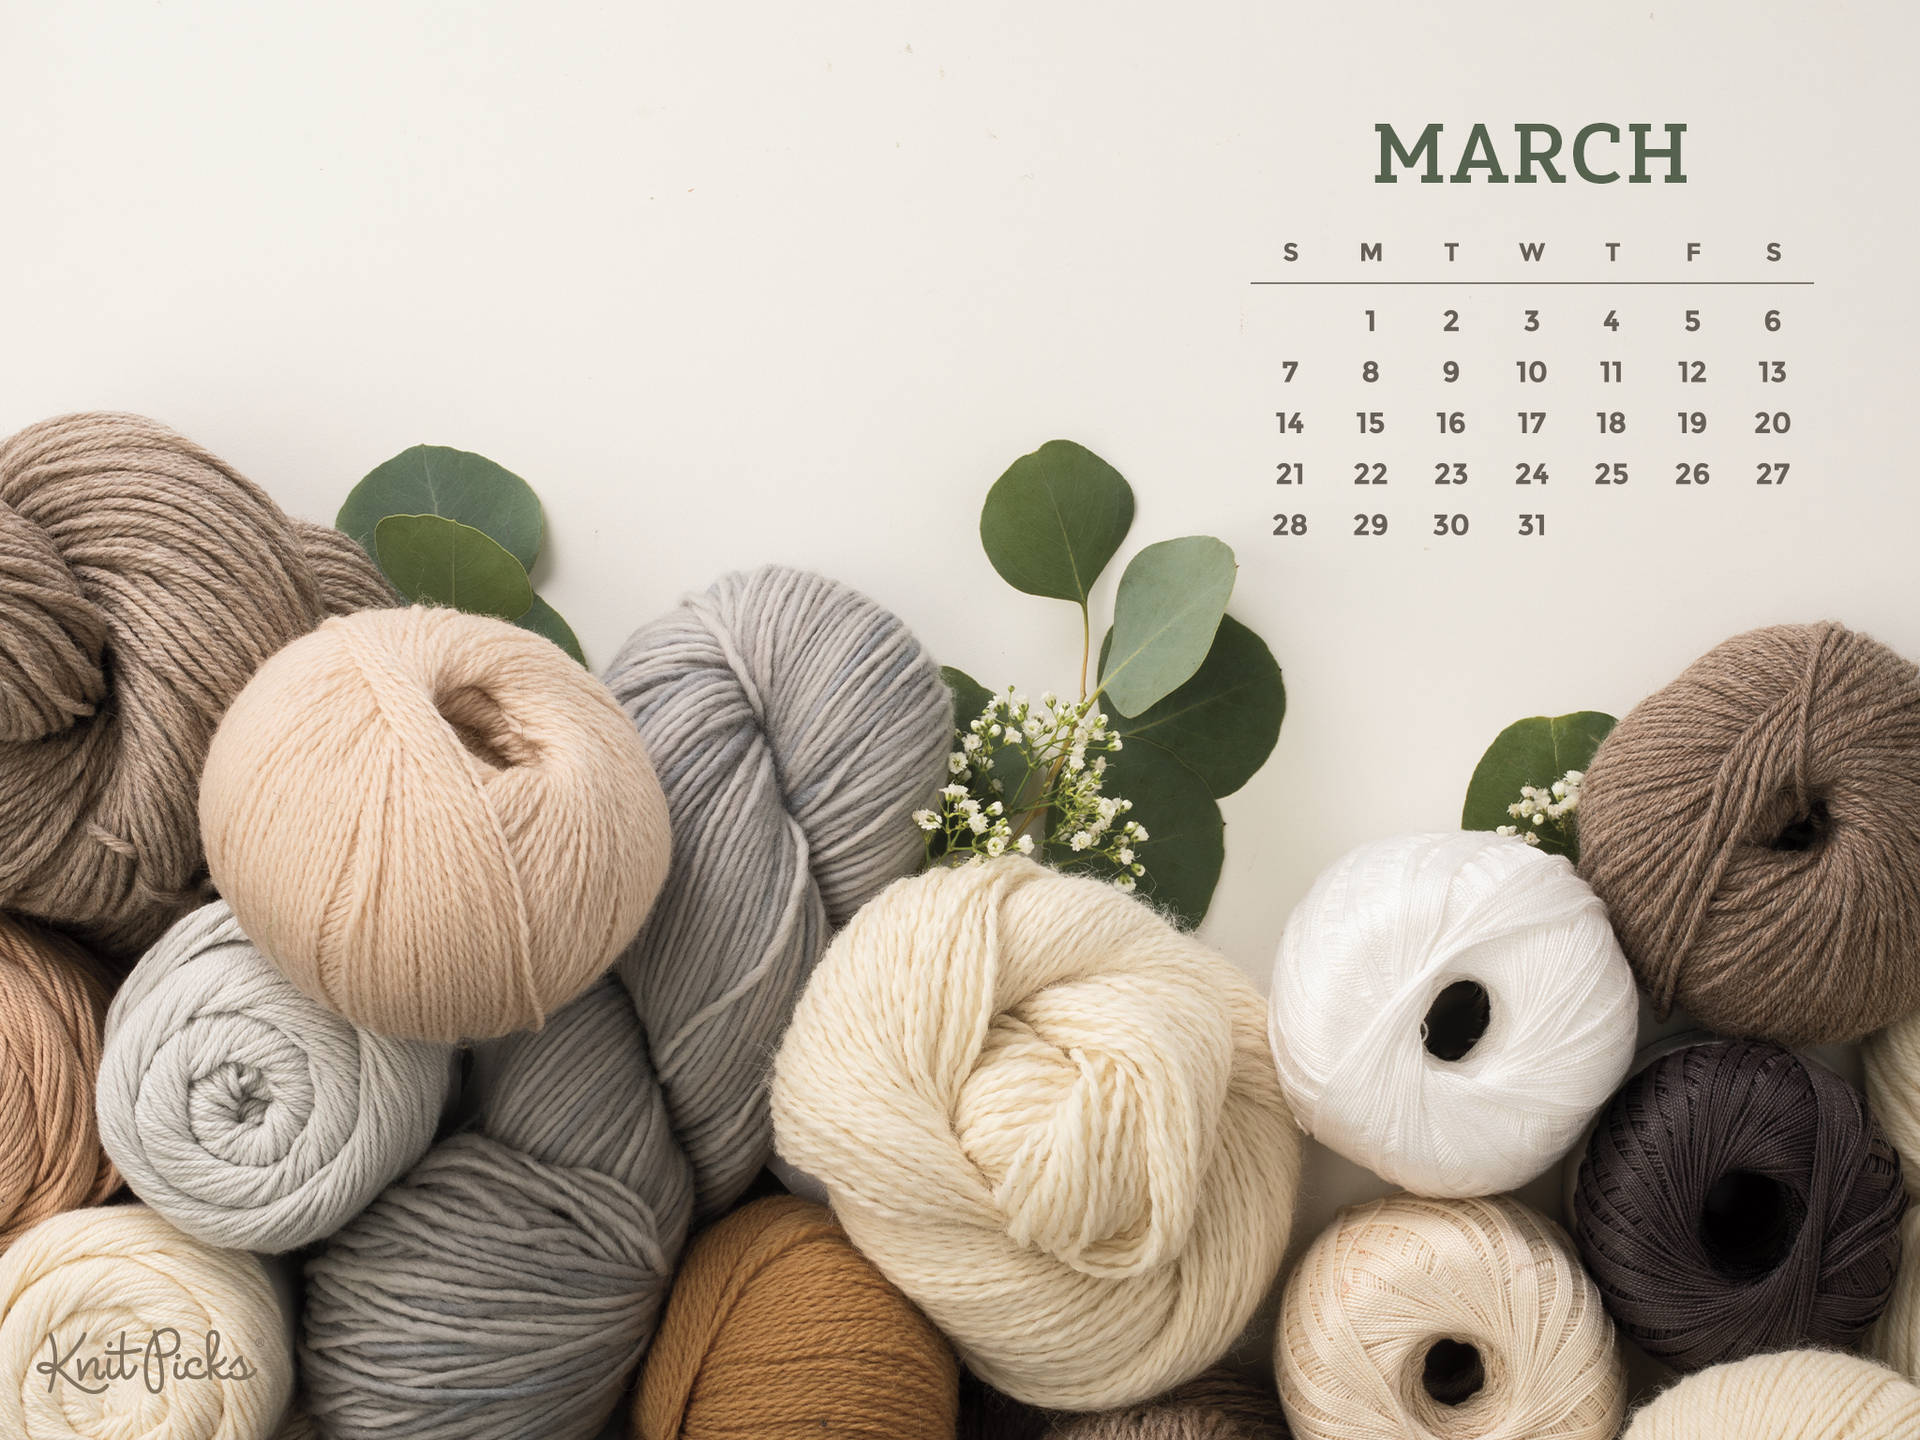 A Calendar With Yarn And Eucalyptus Leaves Wallpaper